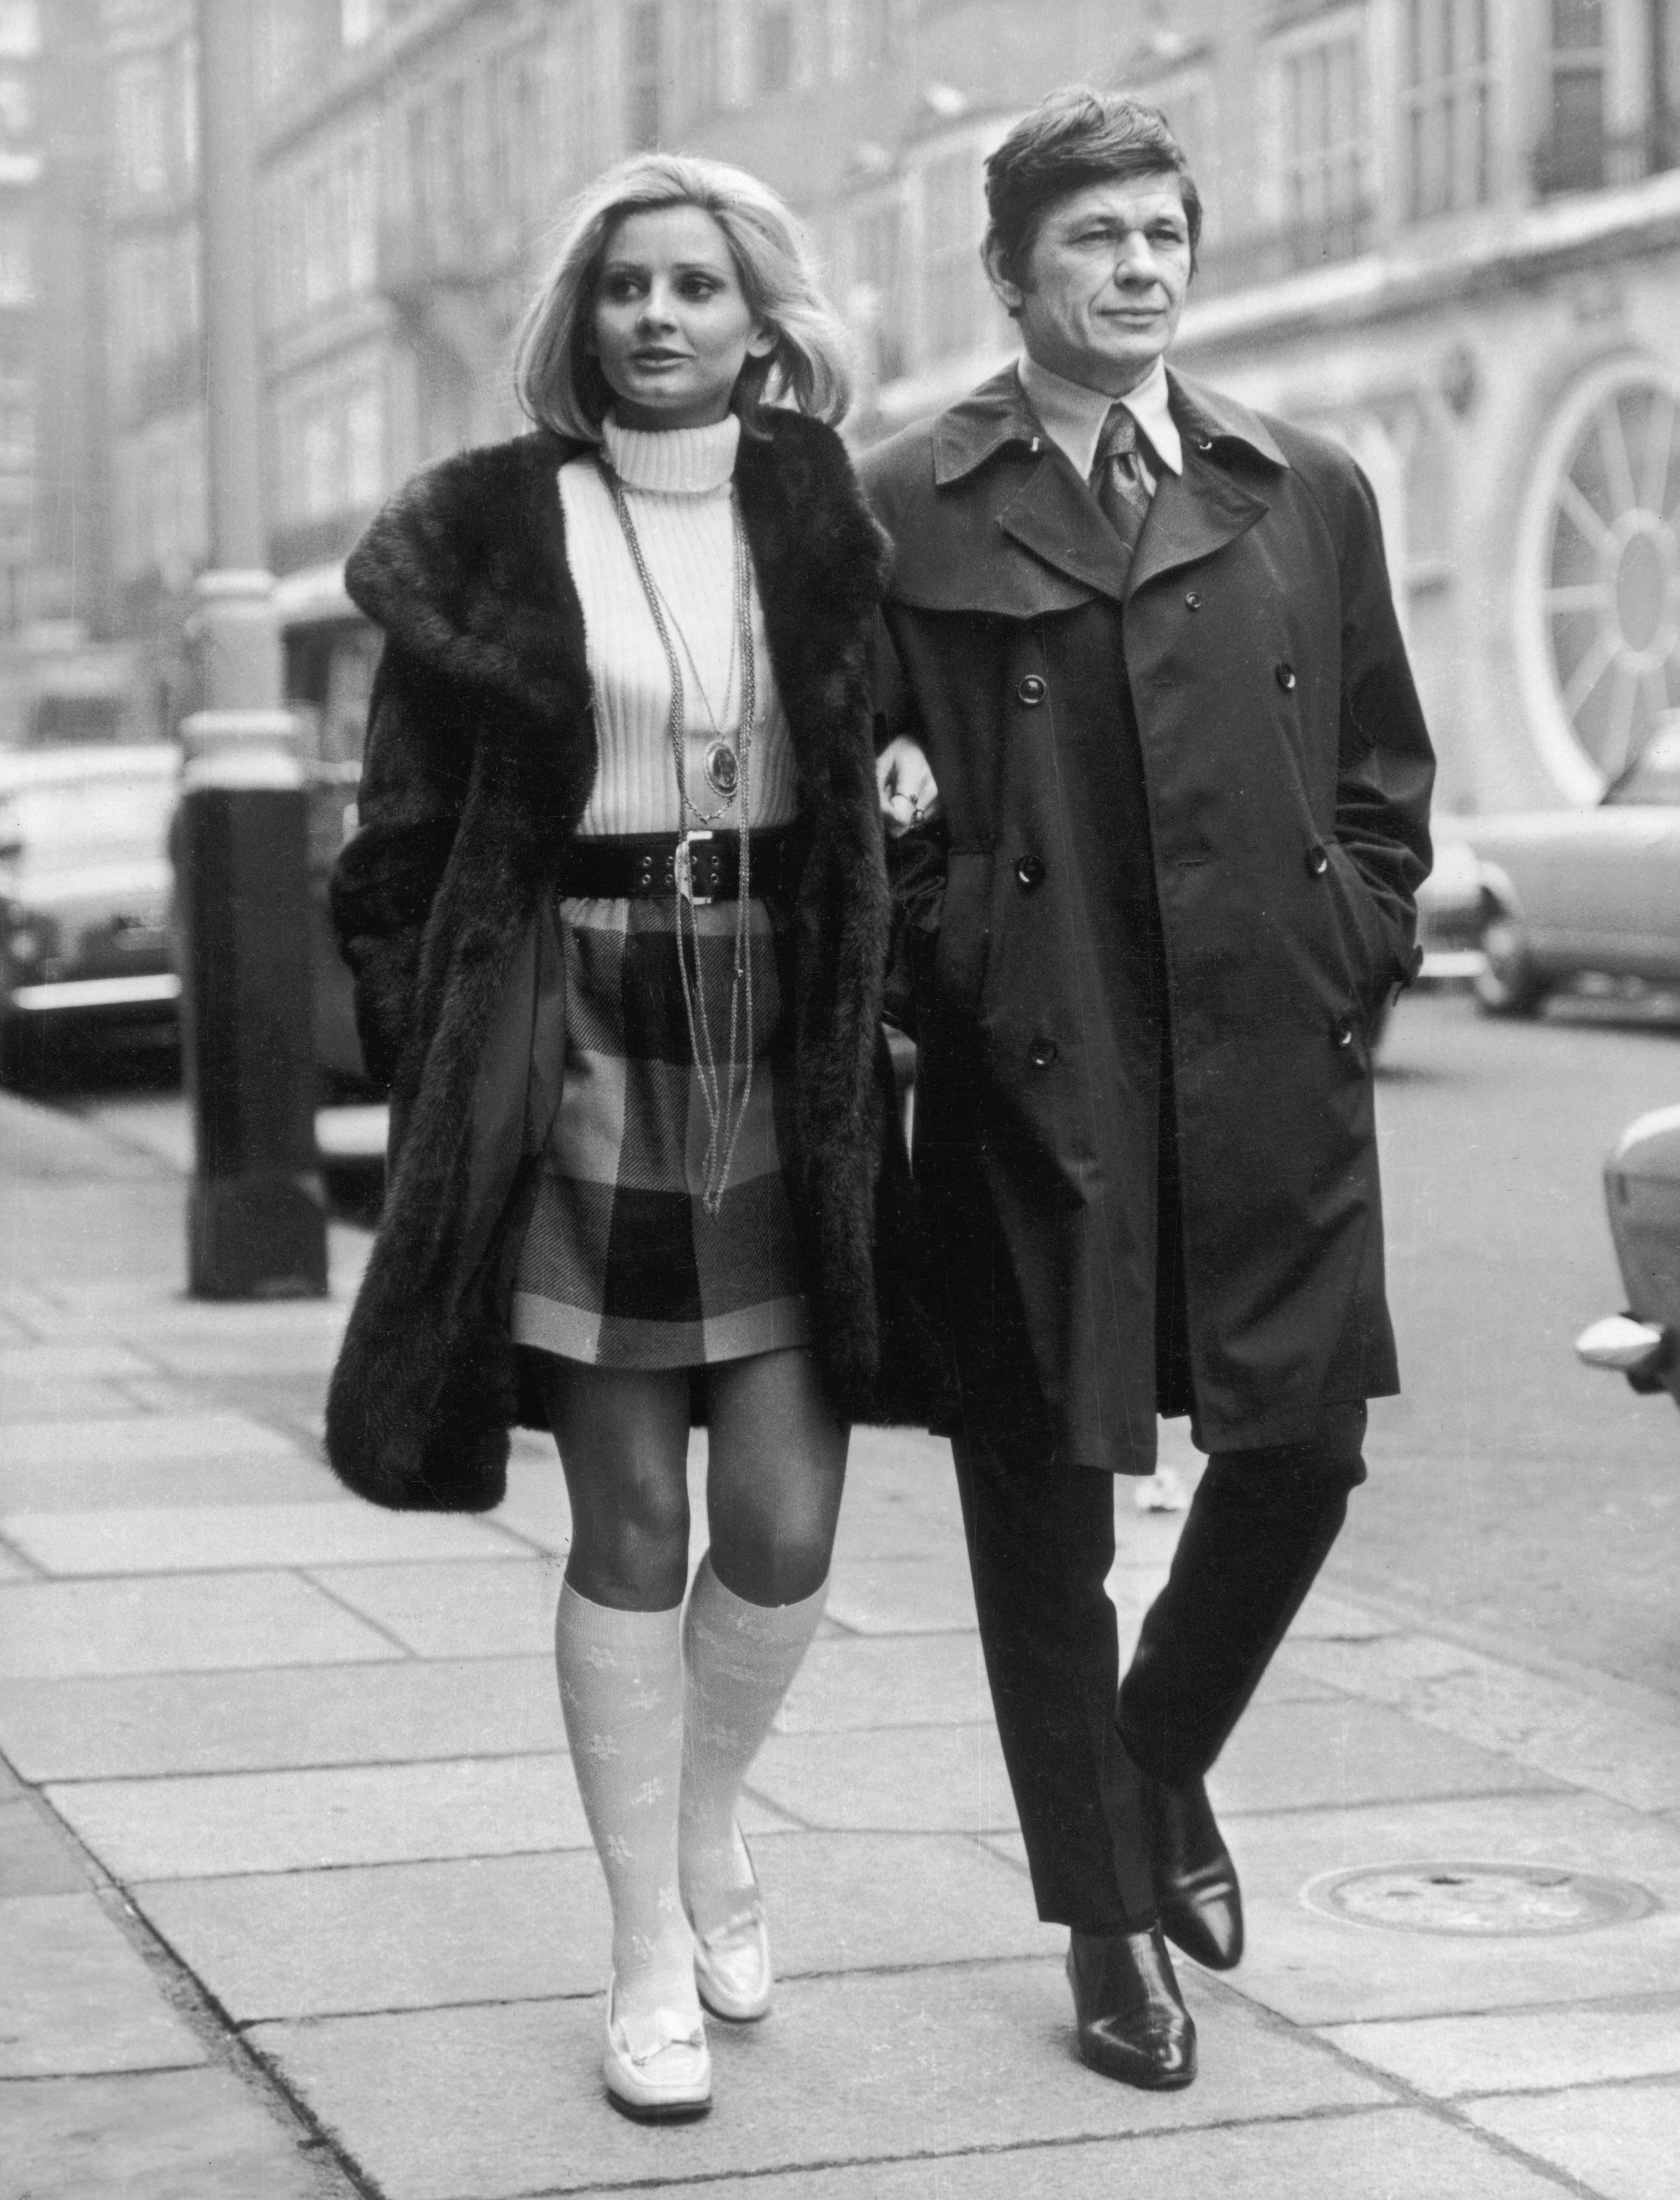 Charles Bronson in London with his actress wife Jill Ireland in 1969 | Source: Getty Images